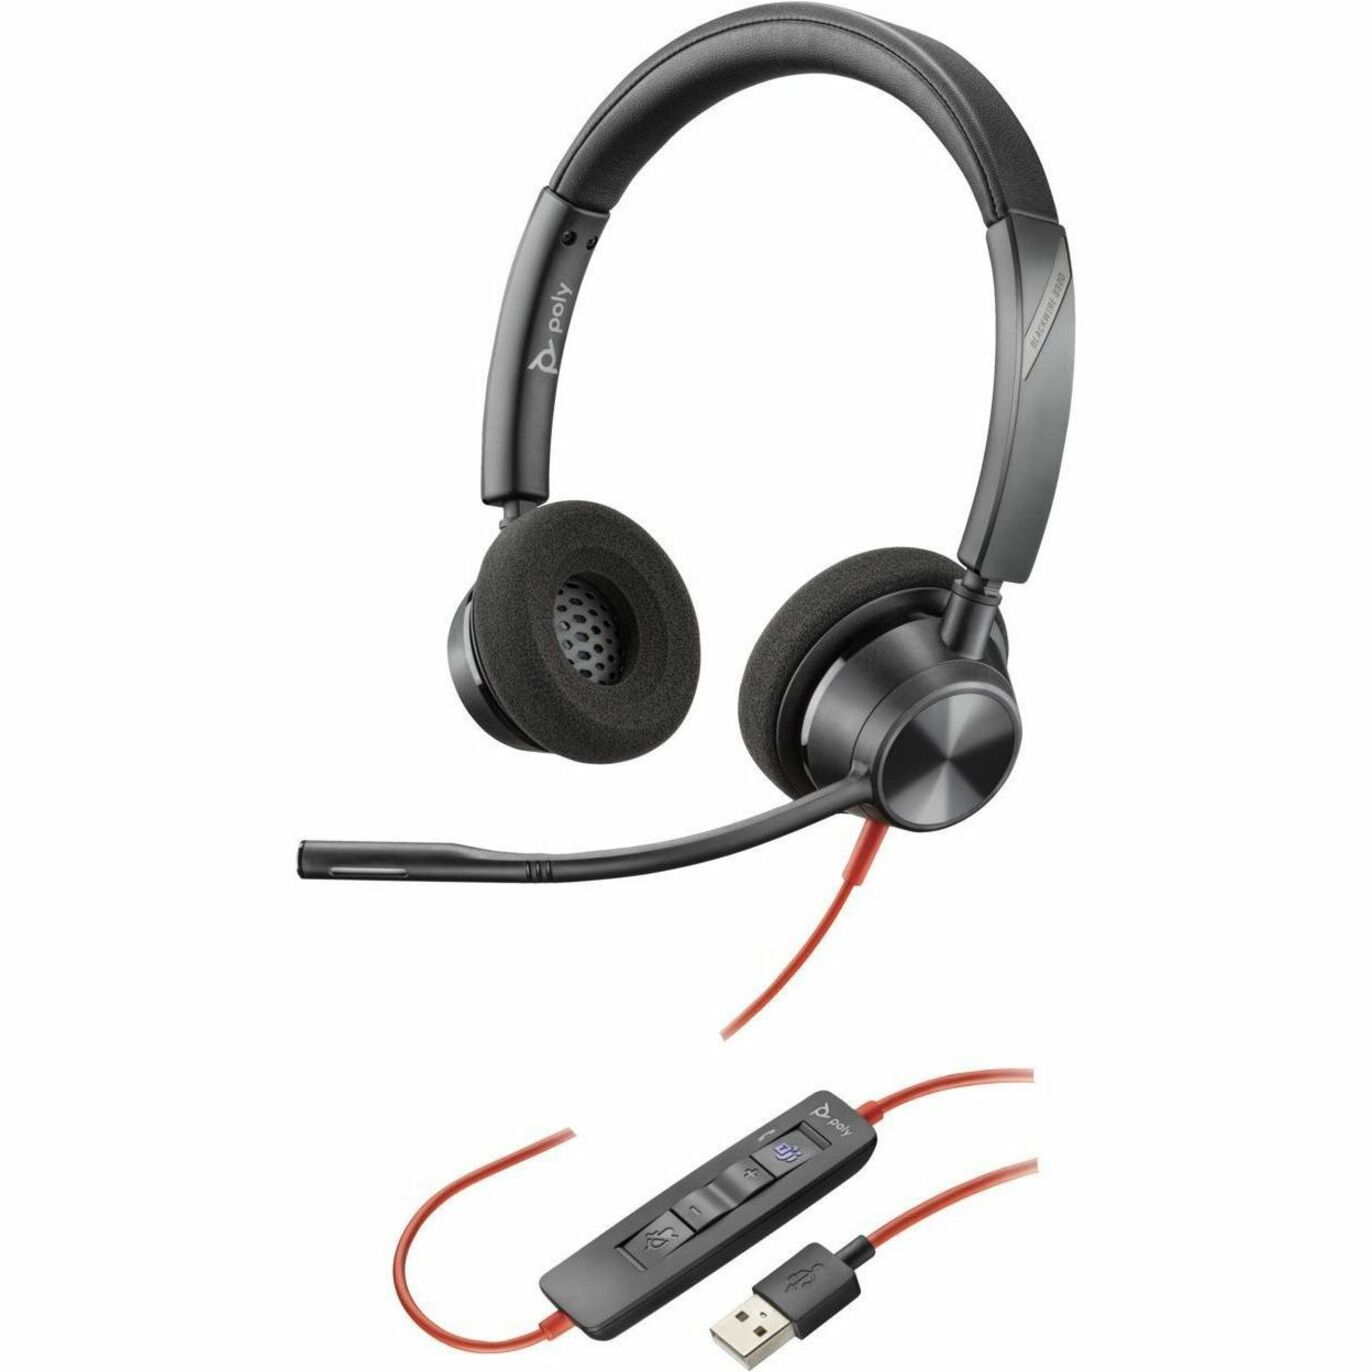 Poly Blackwire 3320 Headset, Binaural Over-the-head, USB Type A/C, 2 Year Warranty